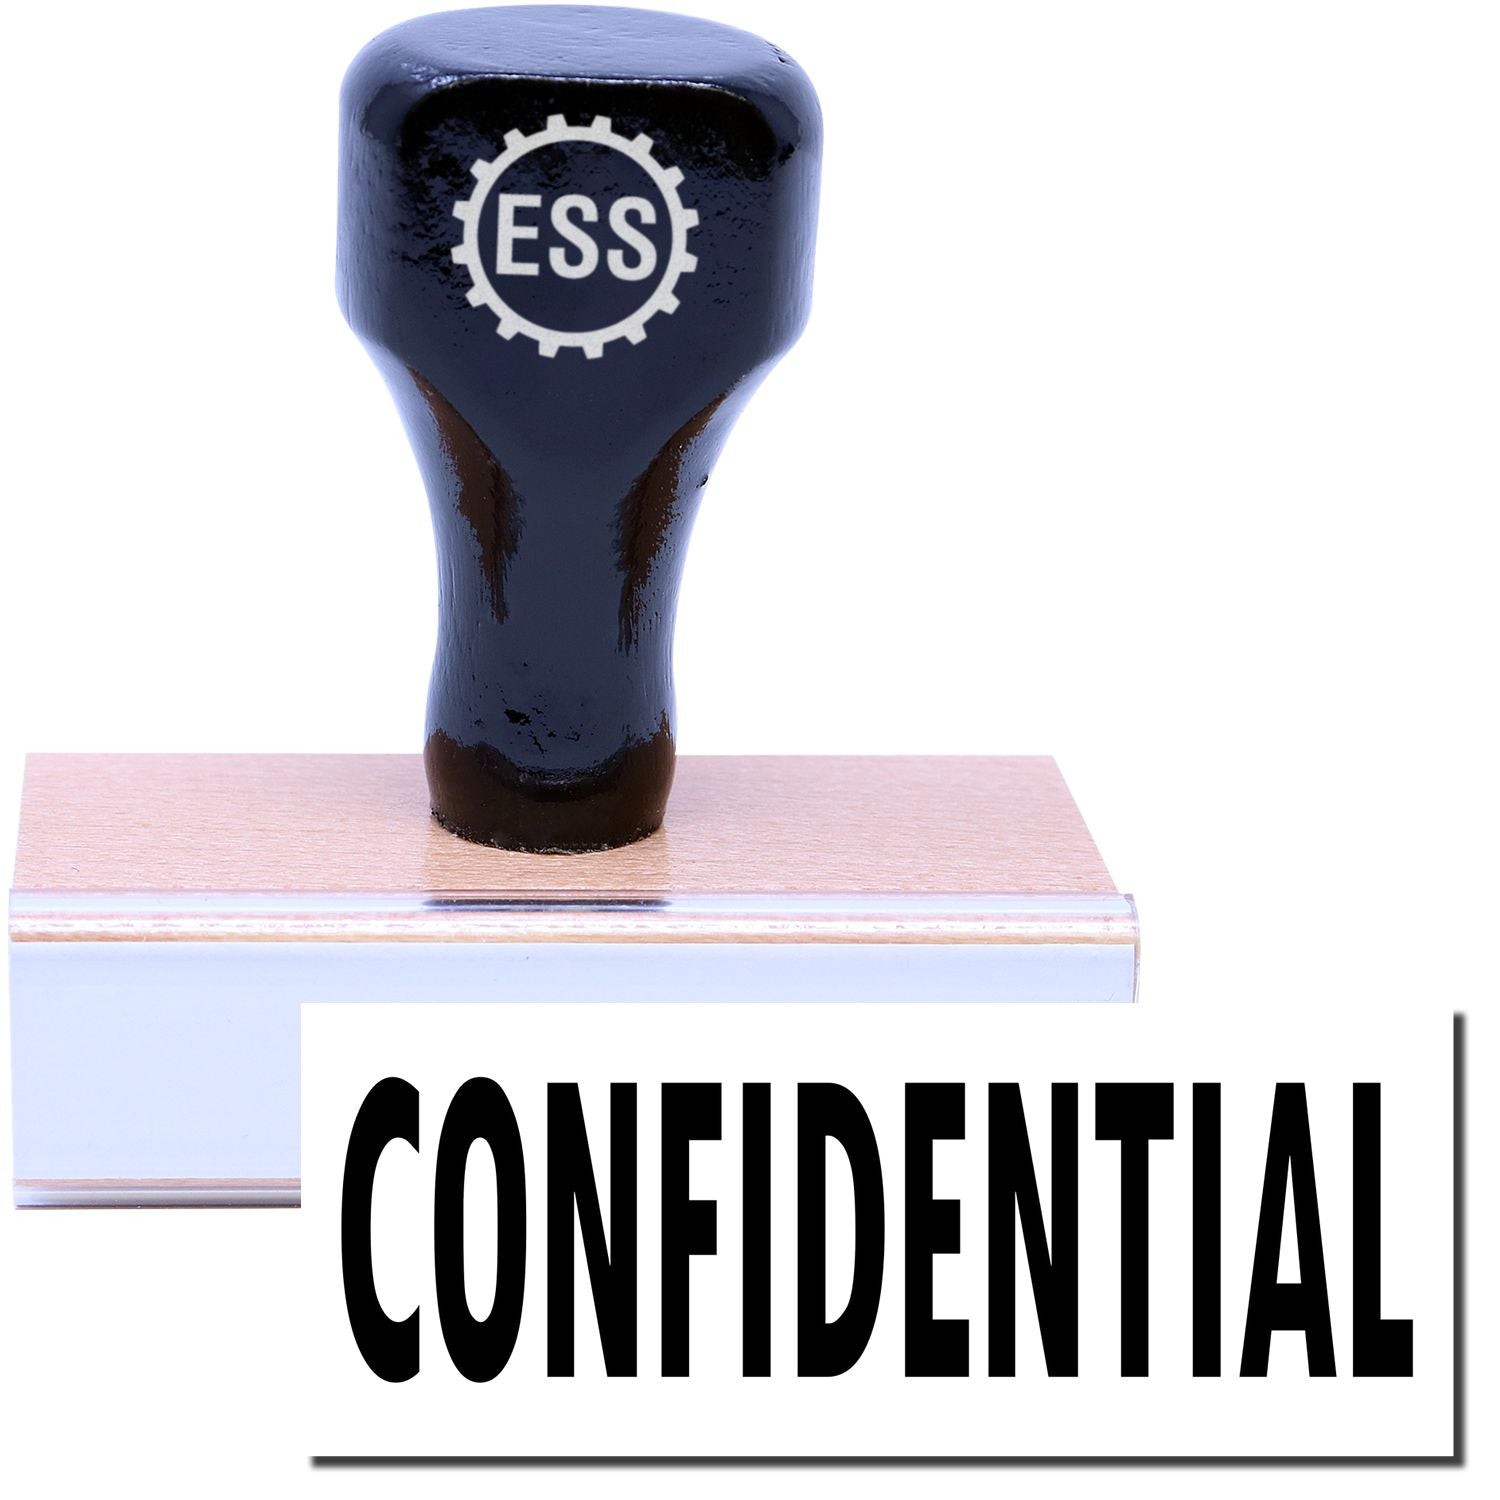 A stock office rubber stamp with a stamped image showing how the text "CONFIDENTIAL" is displayed after stamping.